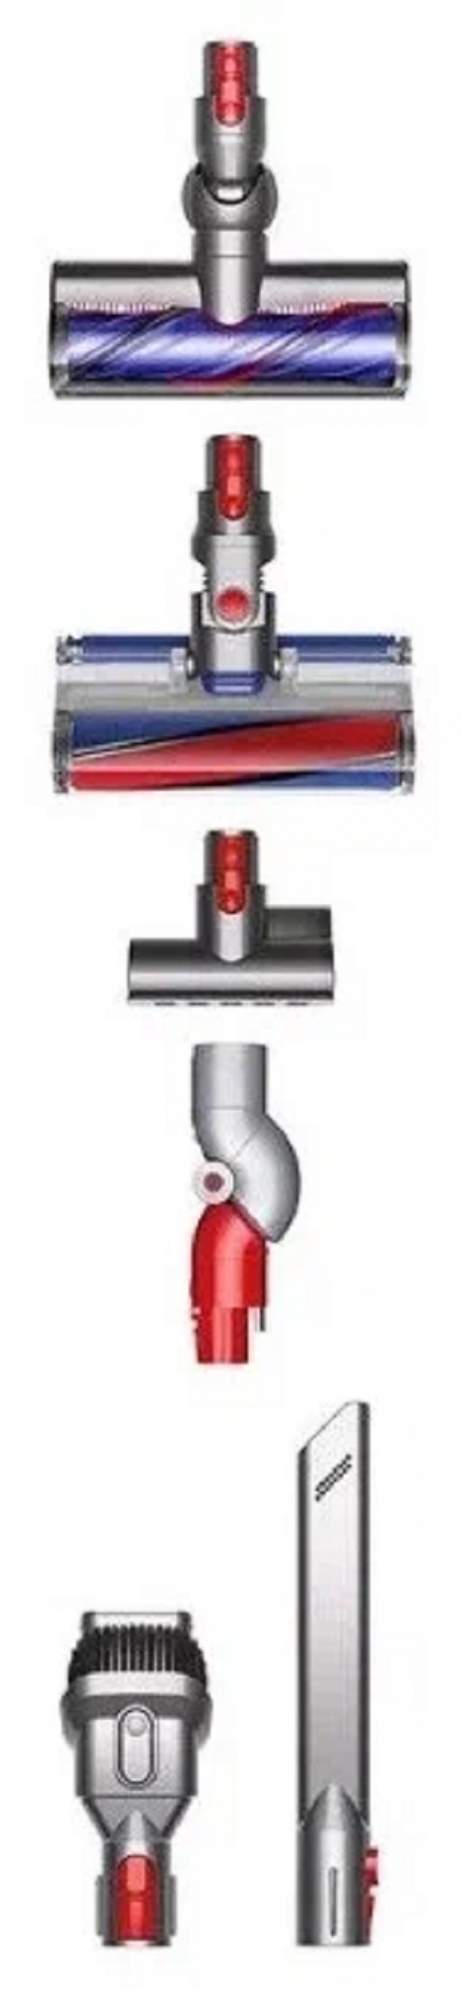 Dyson absolute sv25. Dyson v8 absolute sv25 Silver/Nickel. Dyson v8 sv25. Dyson sv25 v8 absolute. Вертикальный пылесос Dyson v8 absolute+ Iron/Yellow/Nickel (sv10).